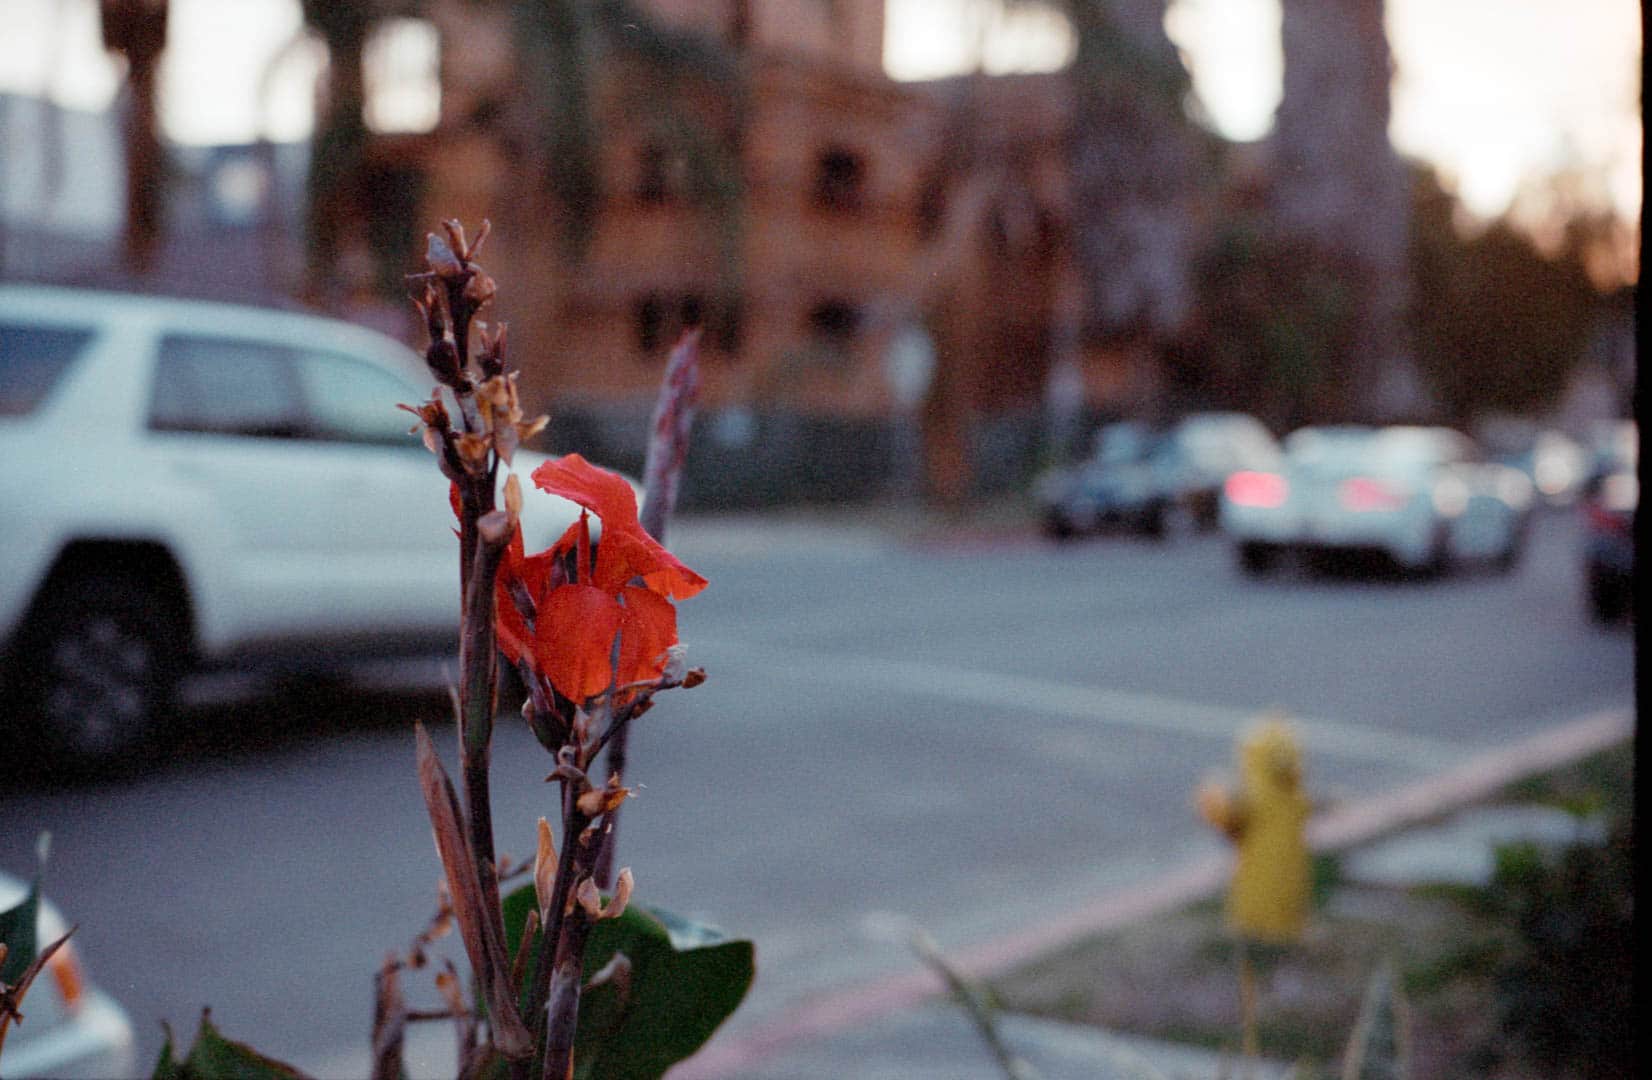 A bright red flower next to a residential street